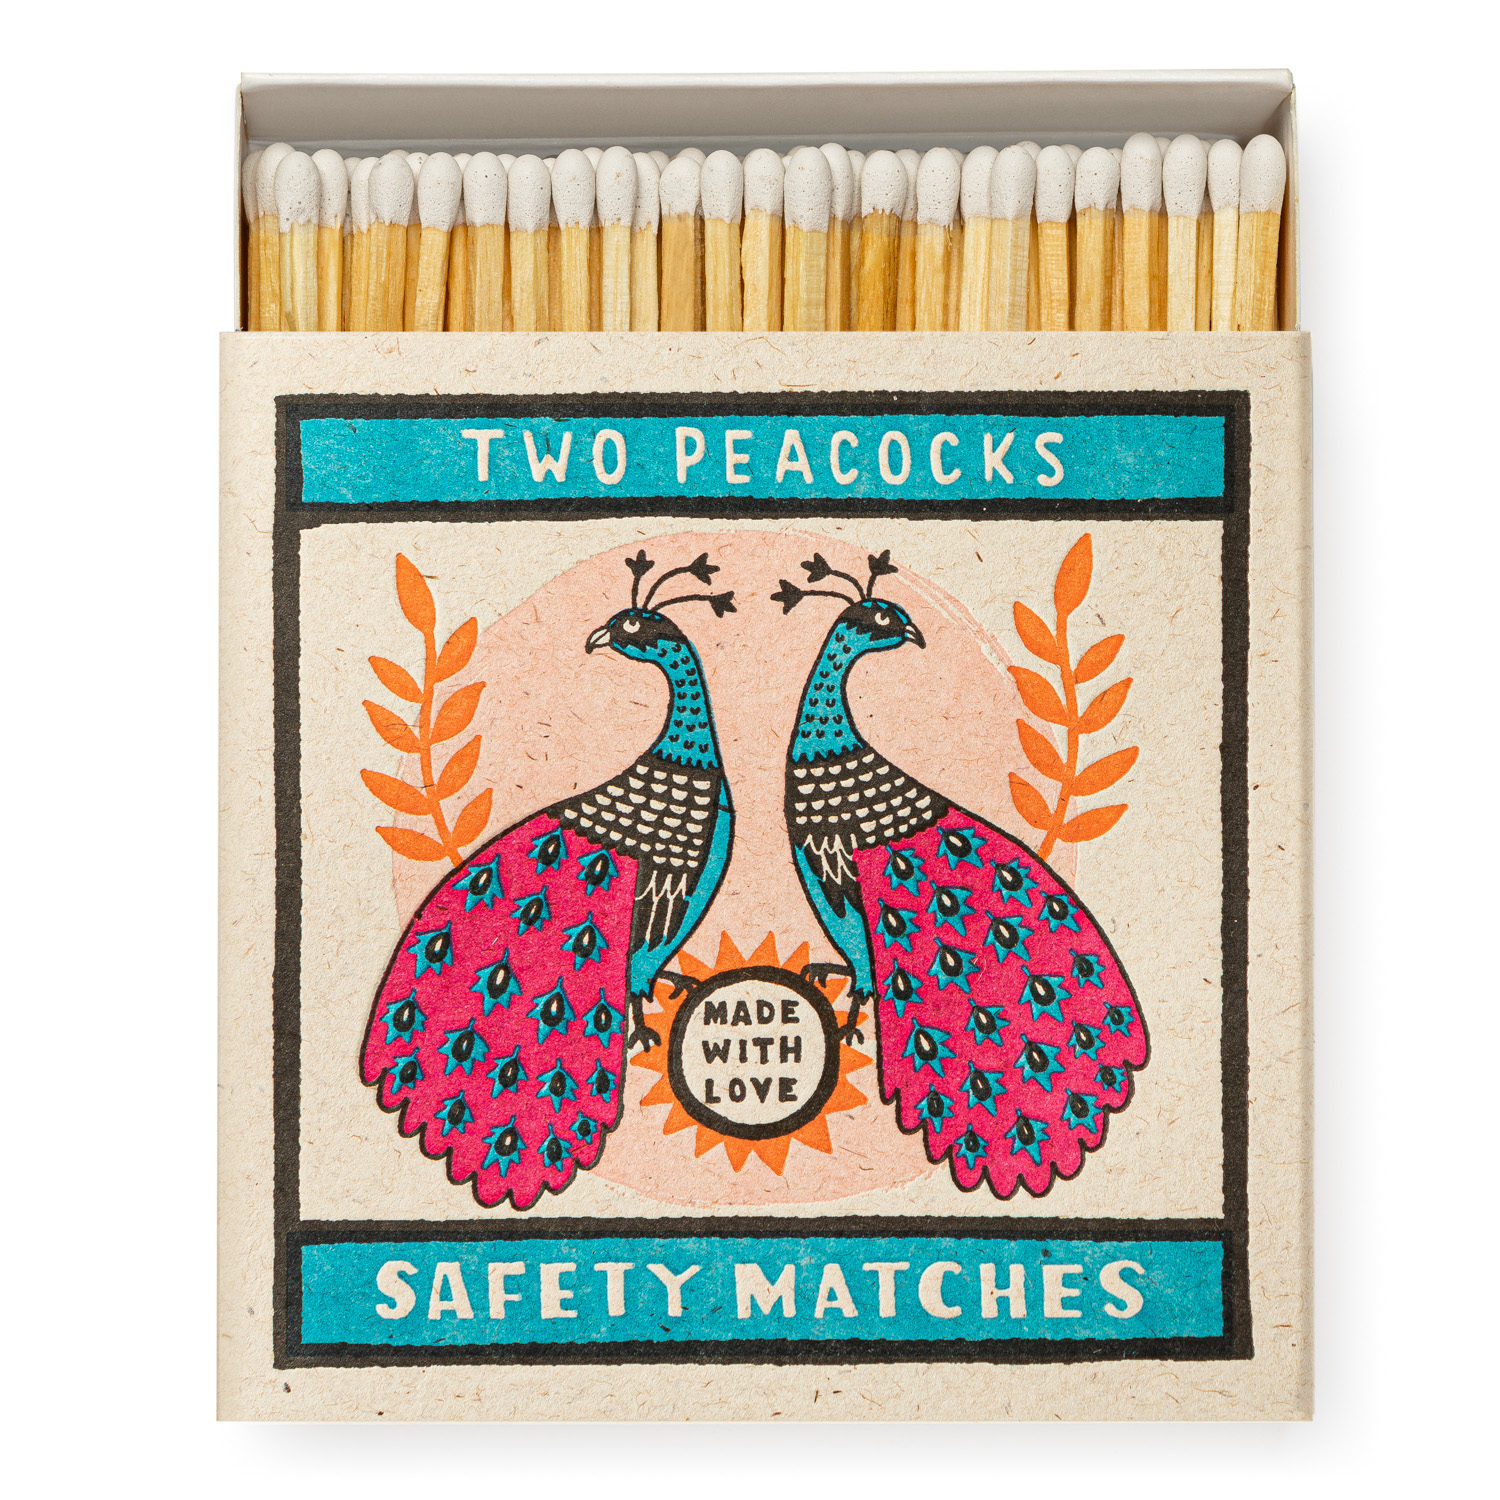 Two Peacocks - Square Matchboxes - Charlotte Farmer - from Archivist Gallery 